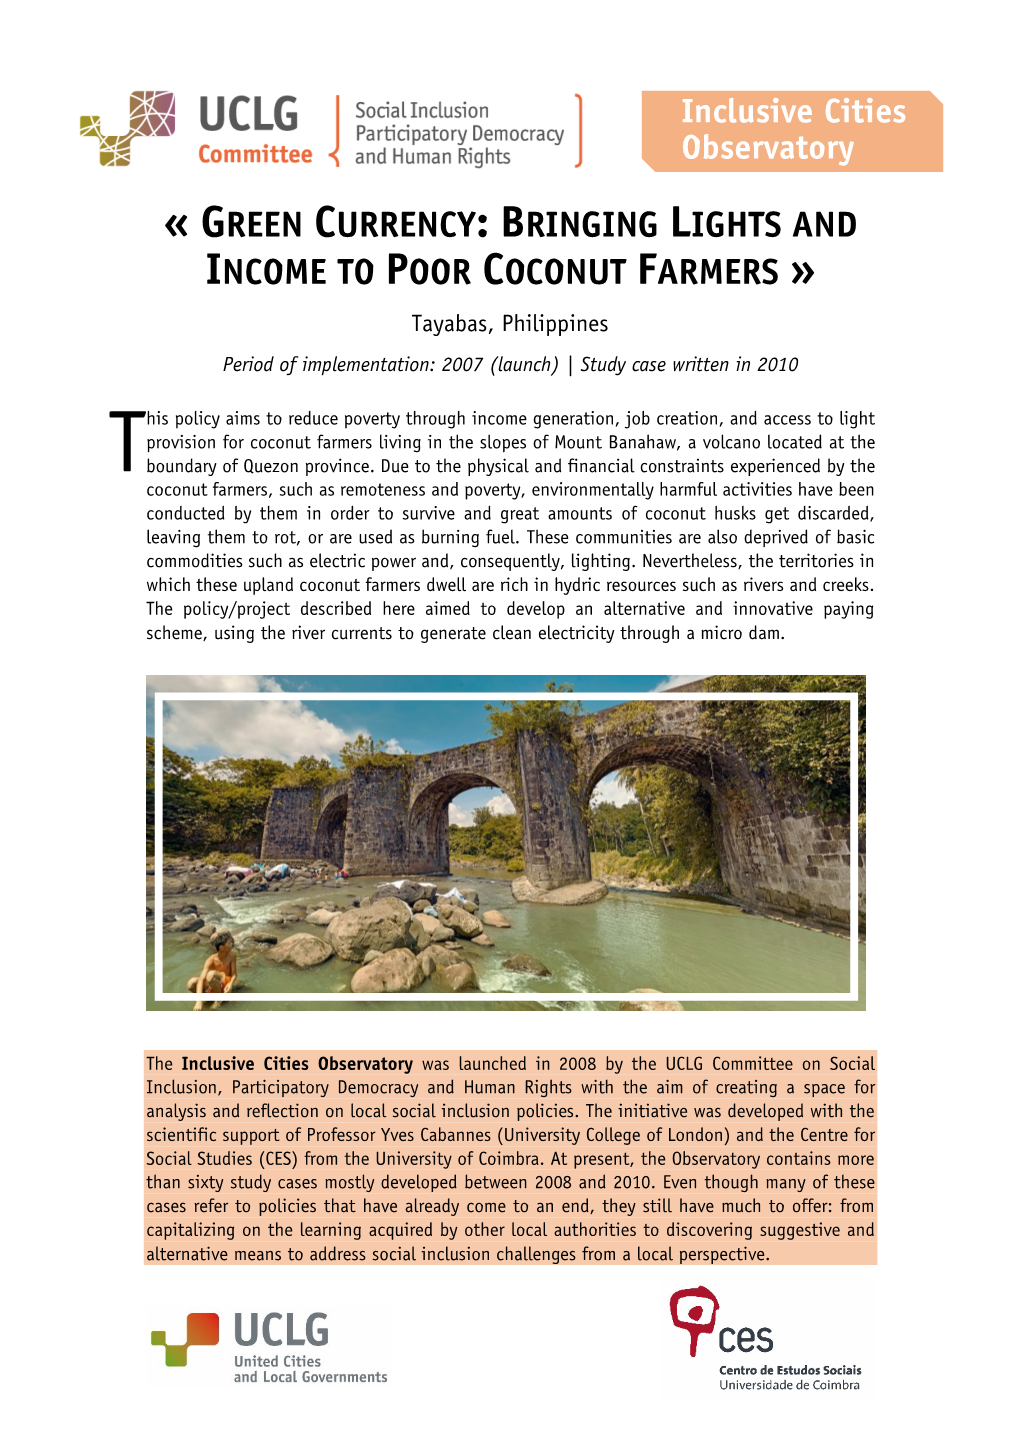 BRINGING LIGHTS and INCOME to POOR COCONUT FARMERS » Tayabas, Philippines Period of Implementation: 2007 (Launch) | Study Case Written in 2010